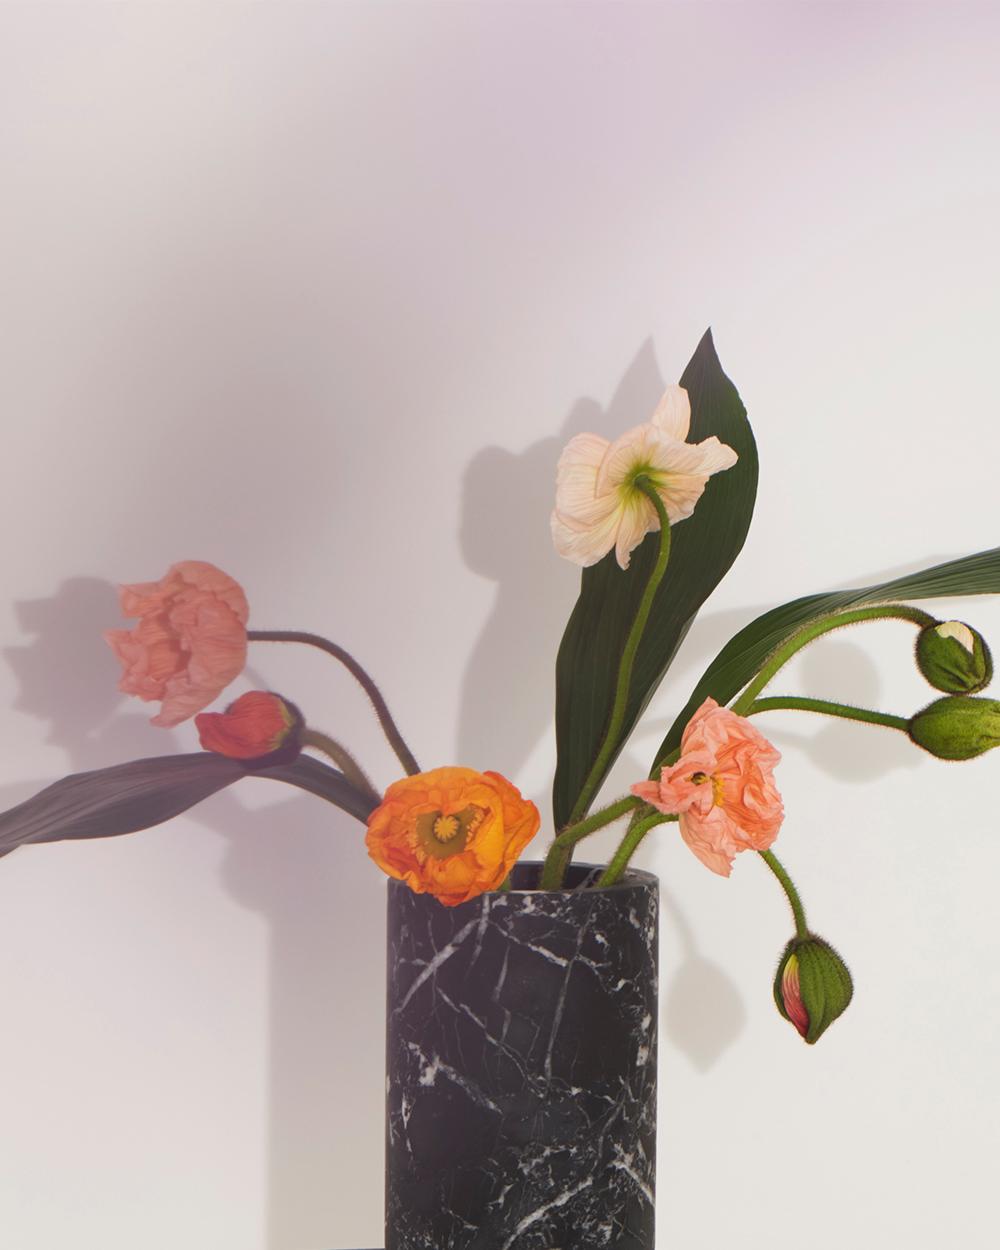 Flower Vase in Black Marquinia marble, designed by Karen Chekerdjian, Made in Italy
Part of the accessories of the Inside Out Collection - vases, candles, bowls. It can be used to customise the Inside Out Dining table and the Console part of the